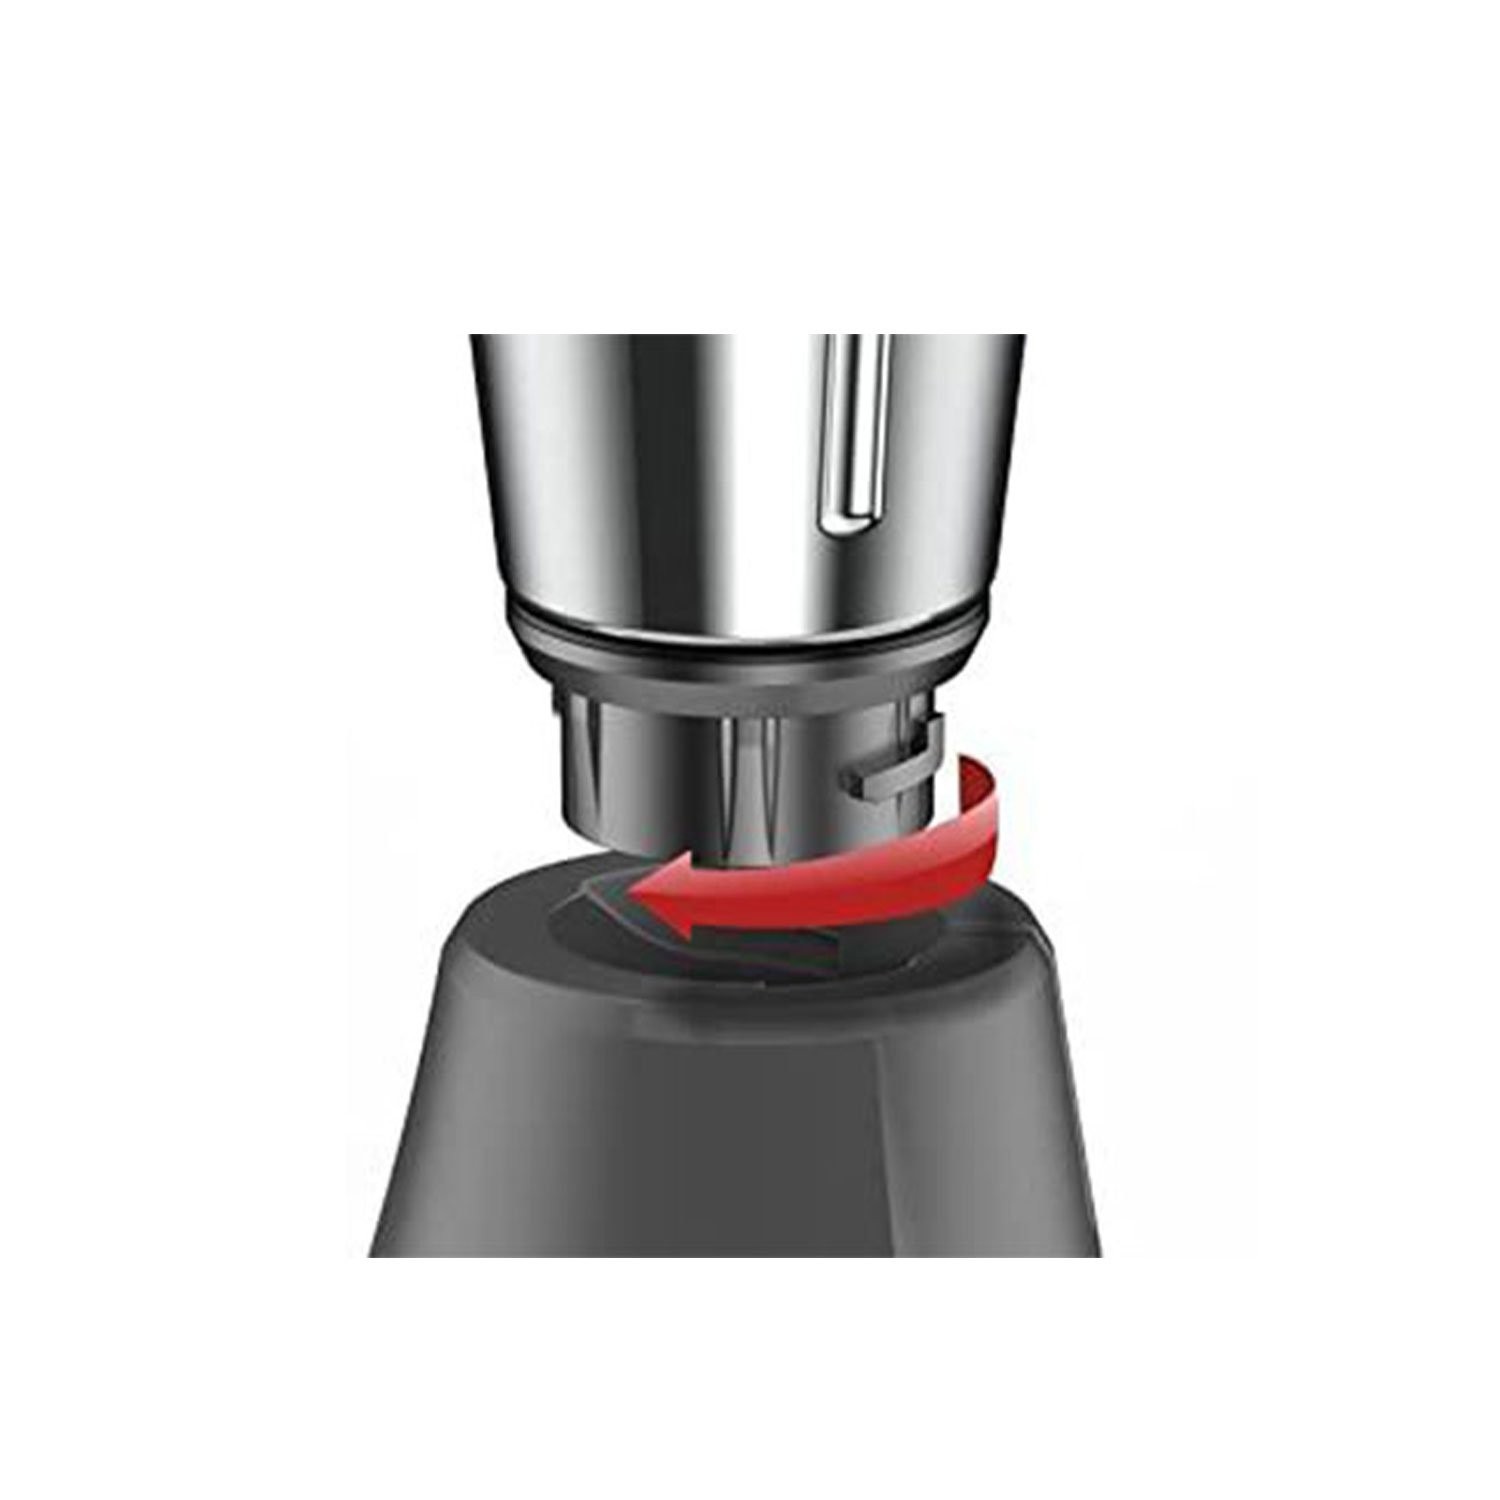 vidiem-eva-citron-550w-stainless-steel-jars-indian-mixer-grinder-spice-coffee-grinder-110v-for-use-in-canada-usa4